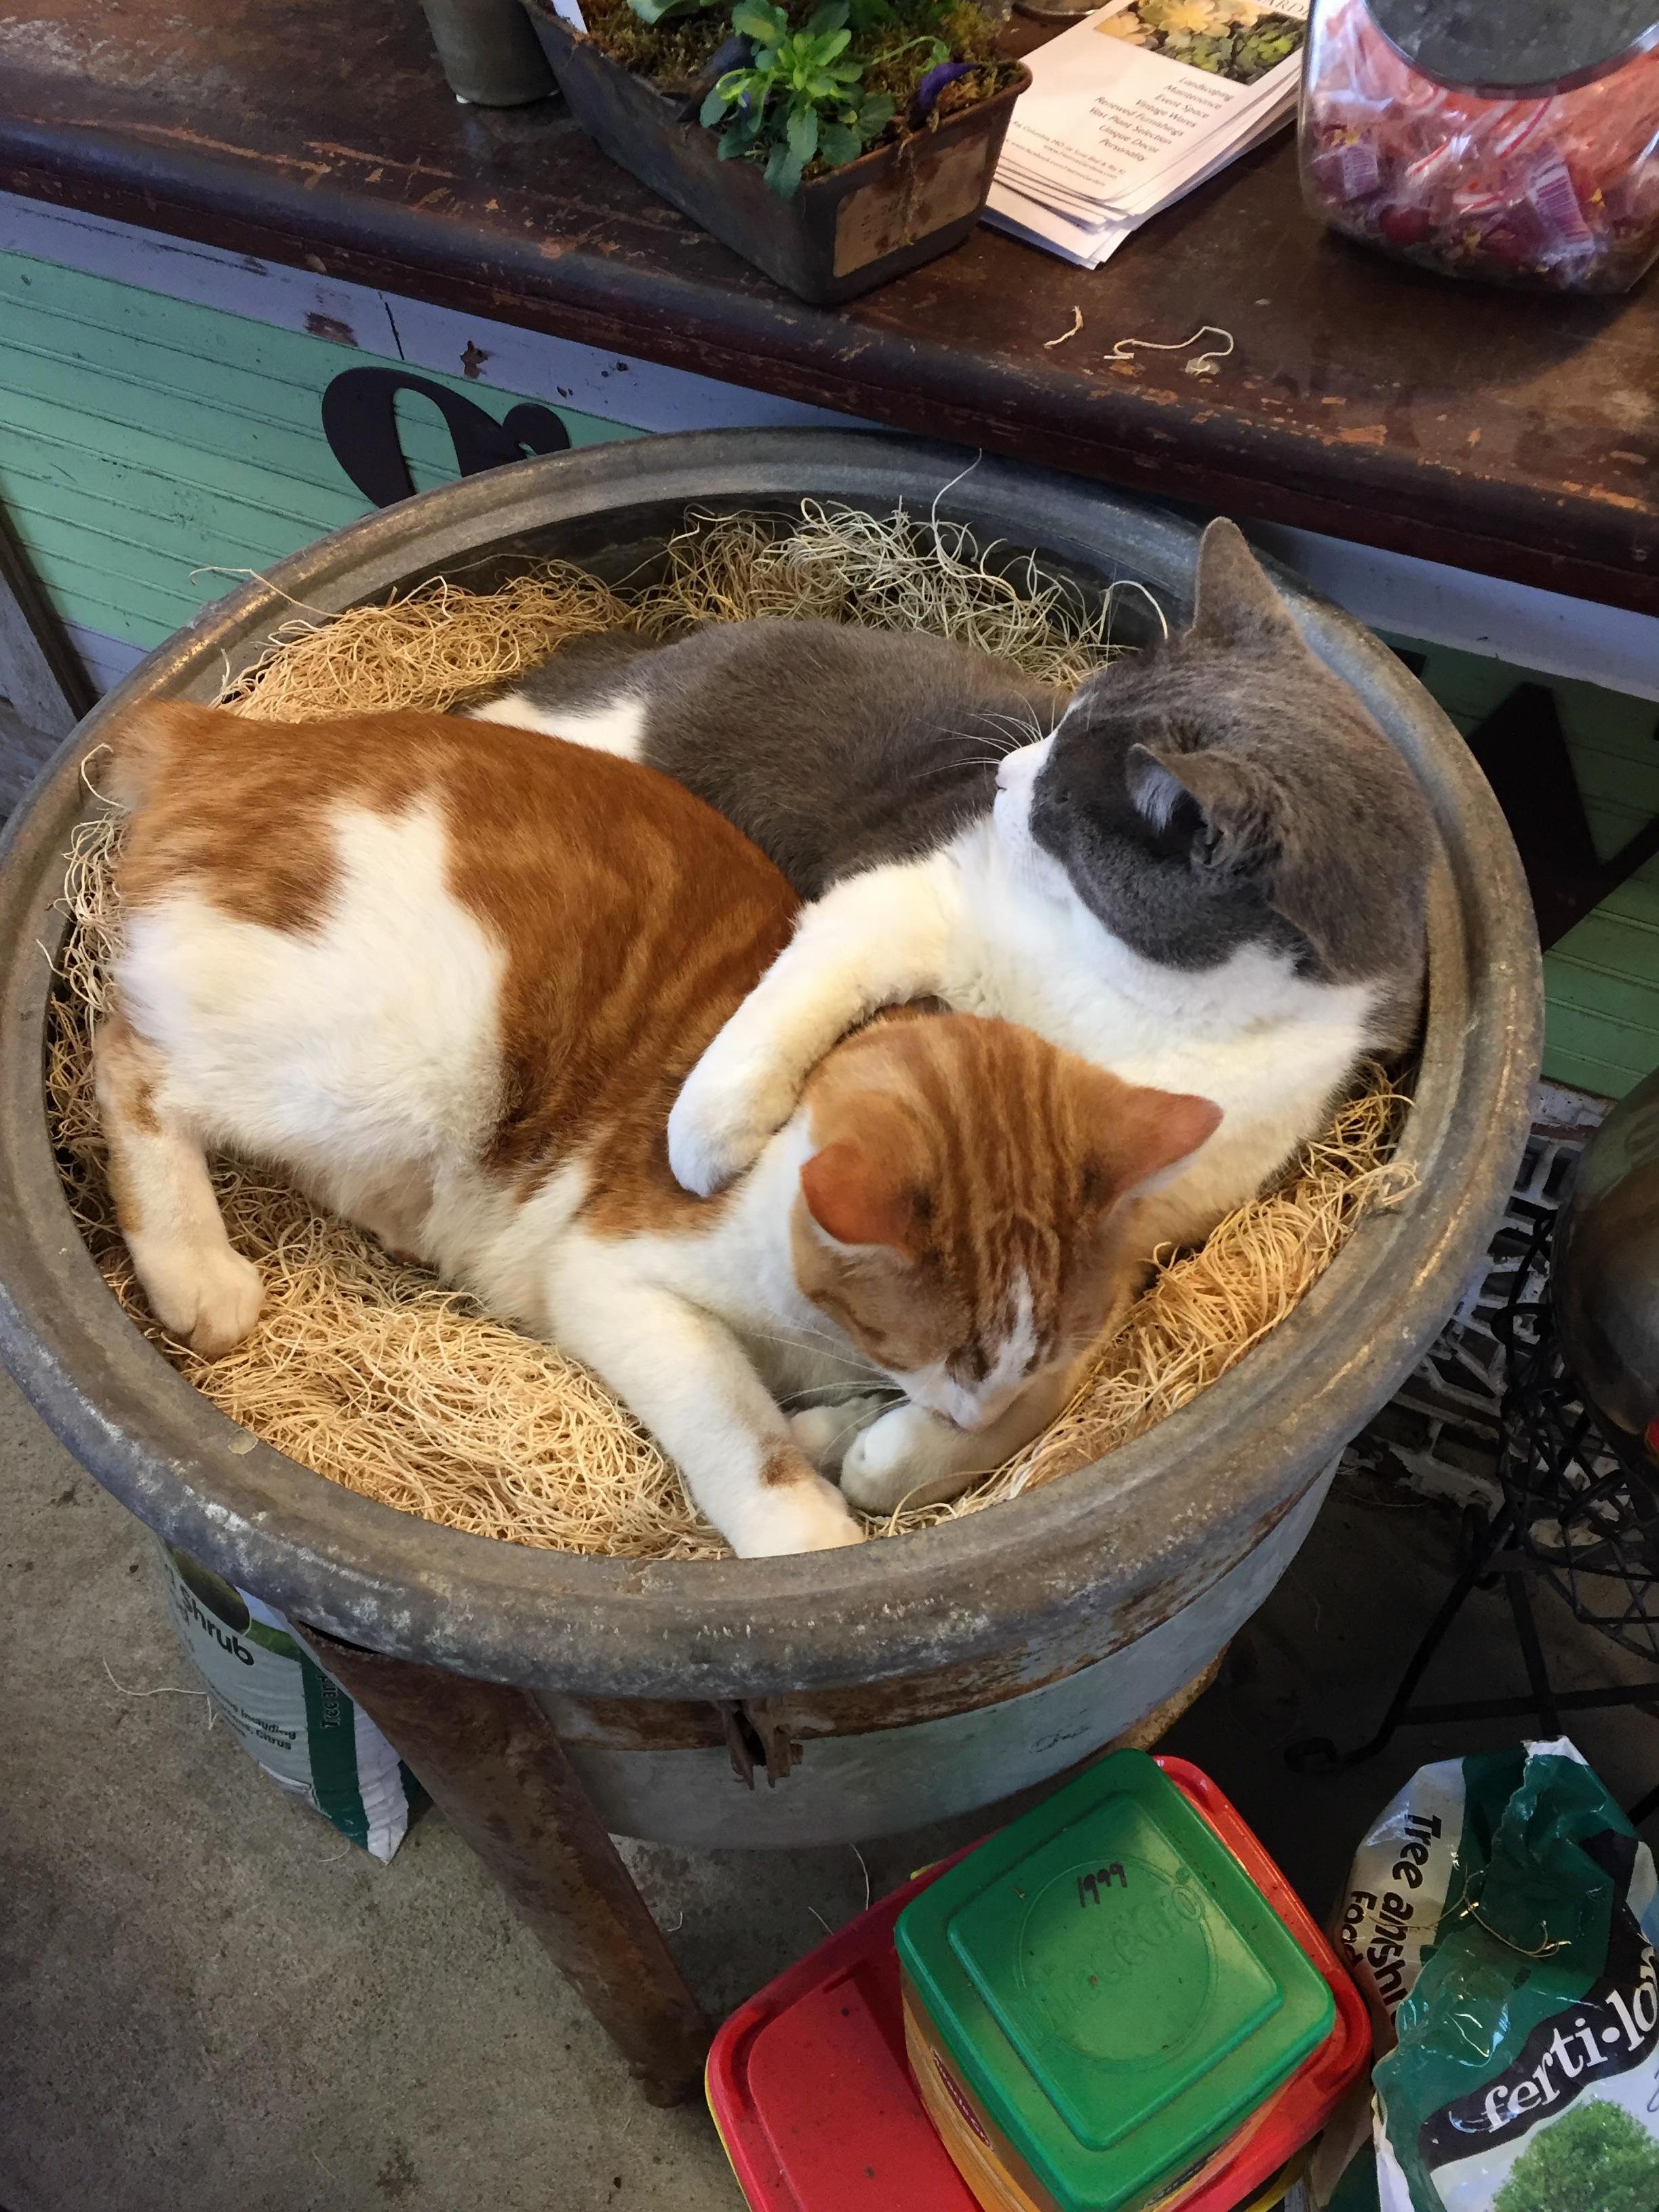 This is where they lay so the customers pet them